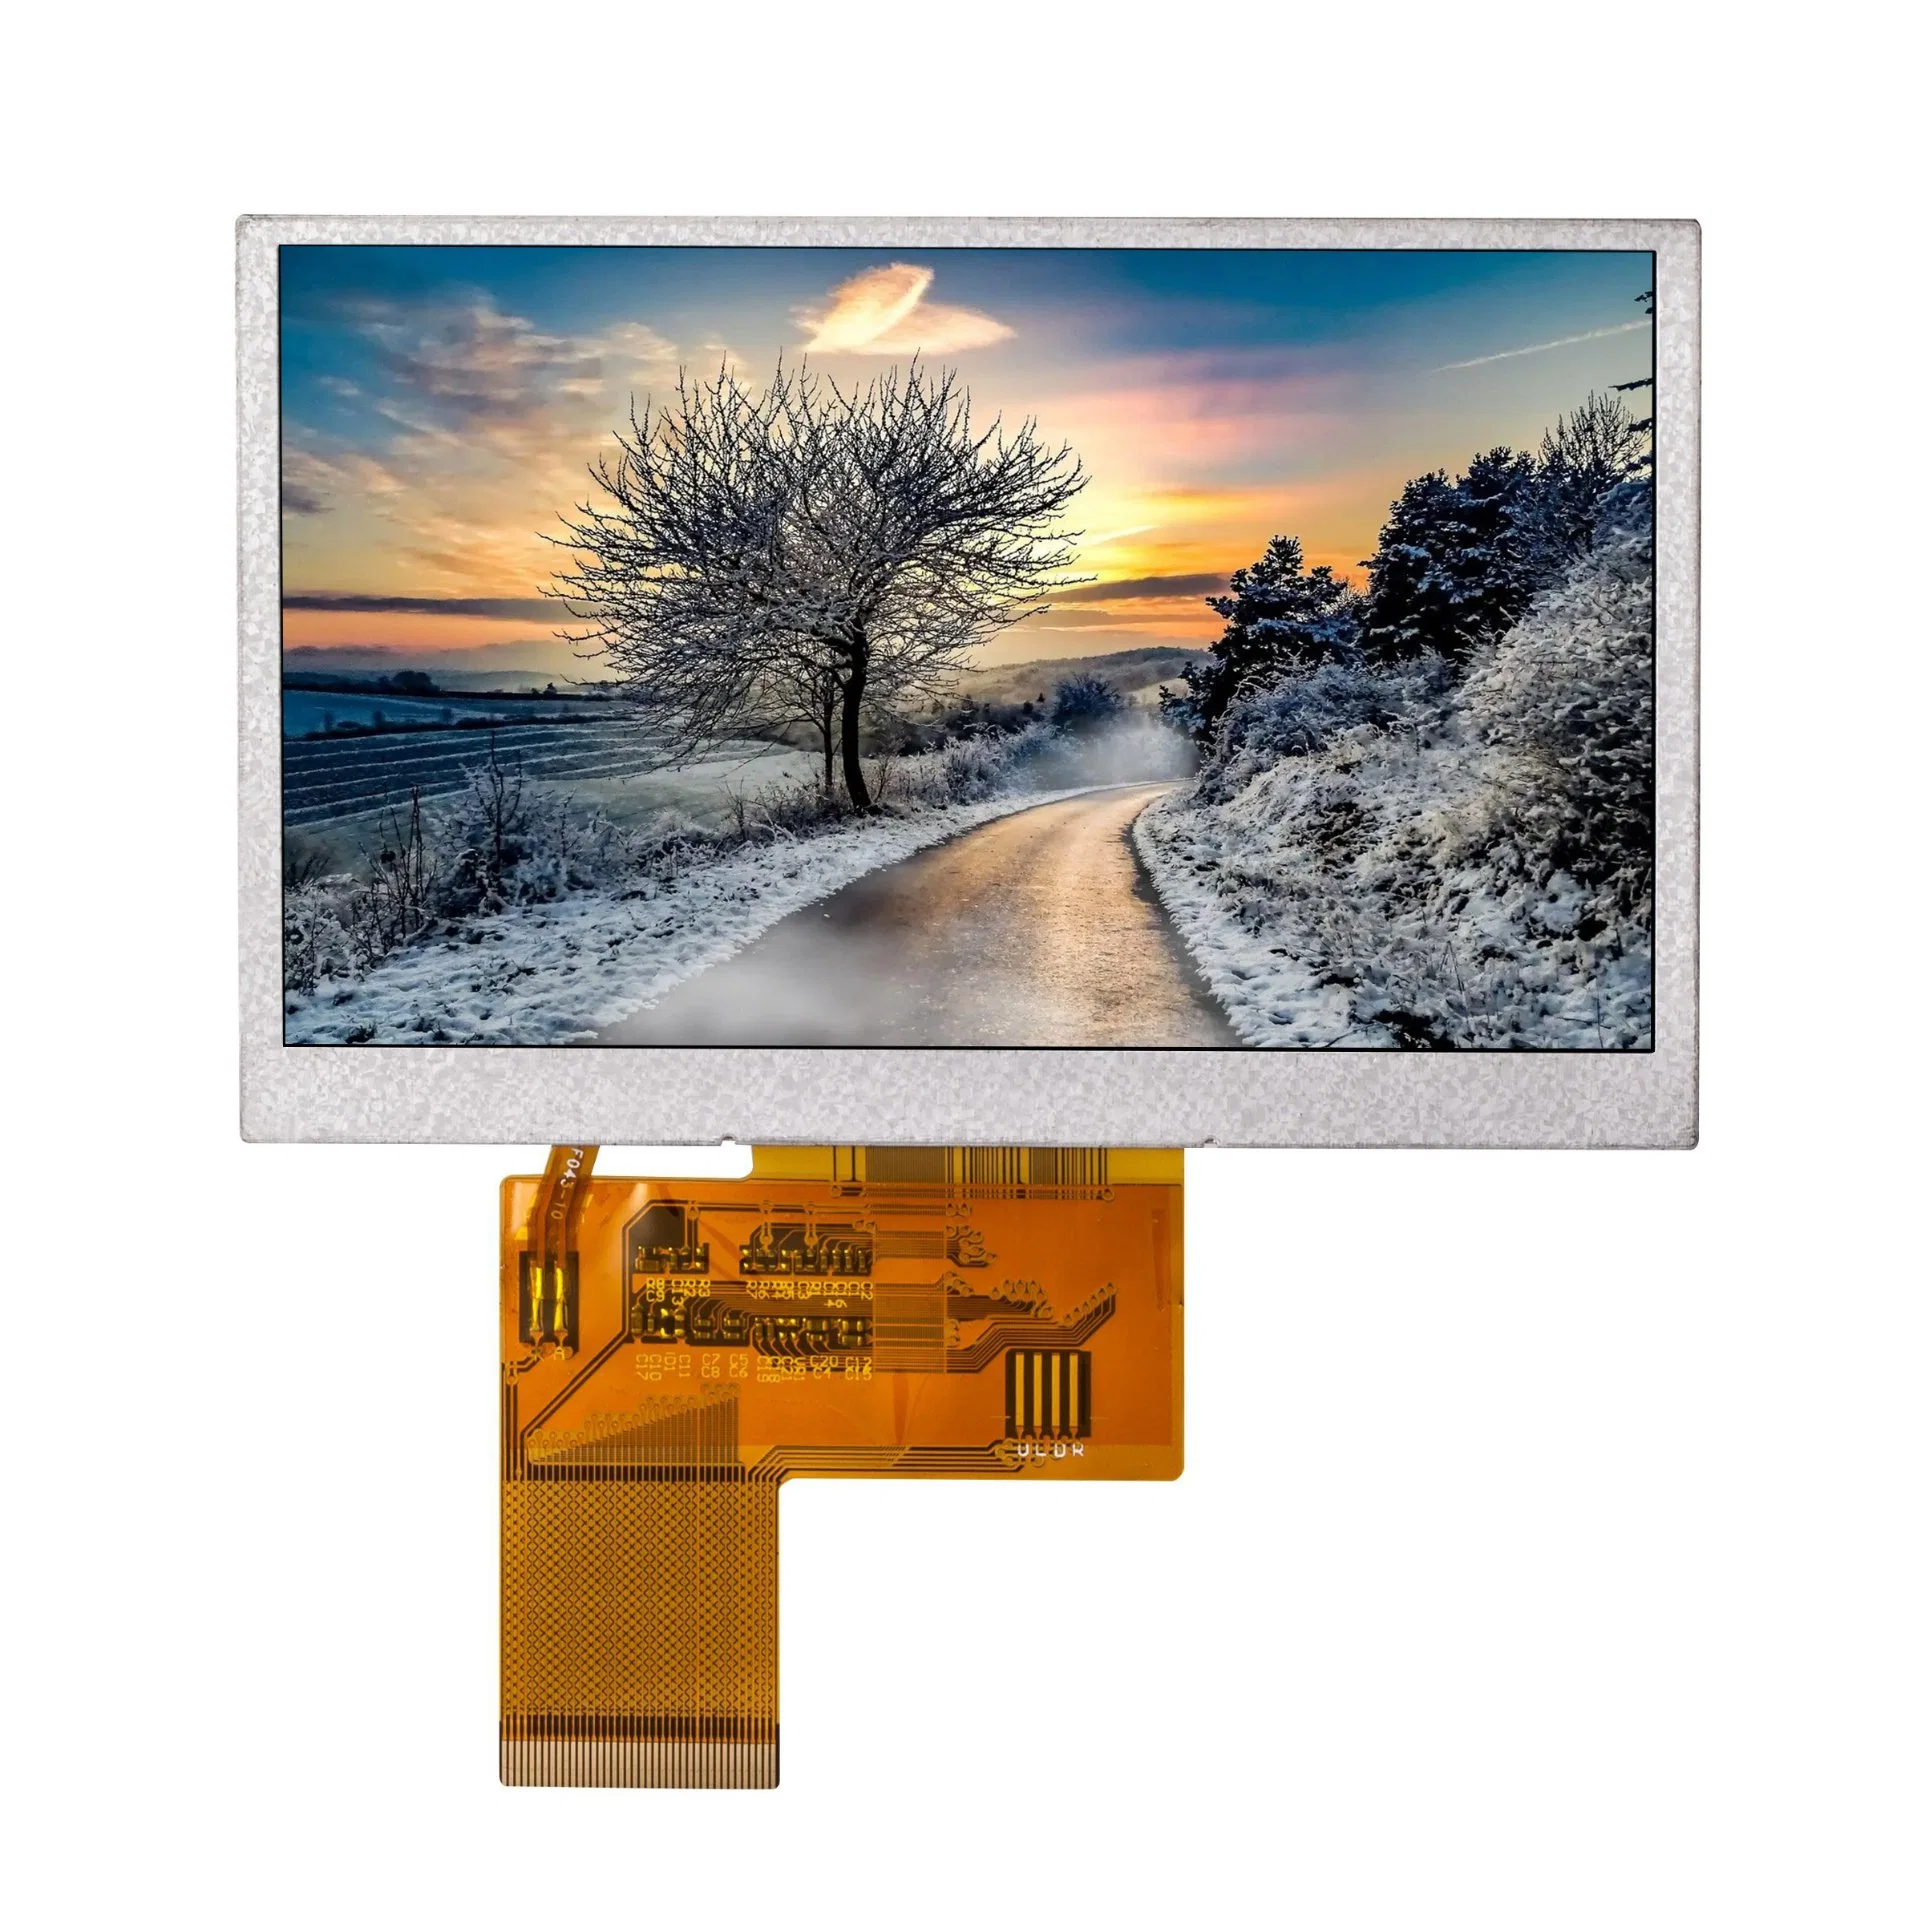 5.0 Inch 480X272 High Brightness TFT LCD Display. Optional Resistive/Capacitive Touch Screen